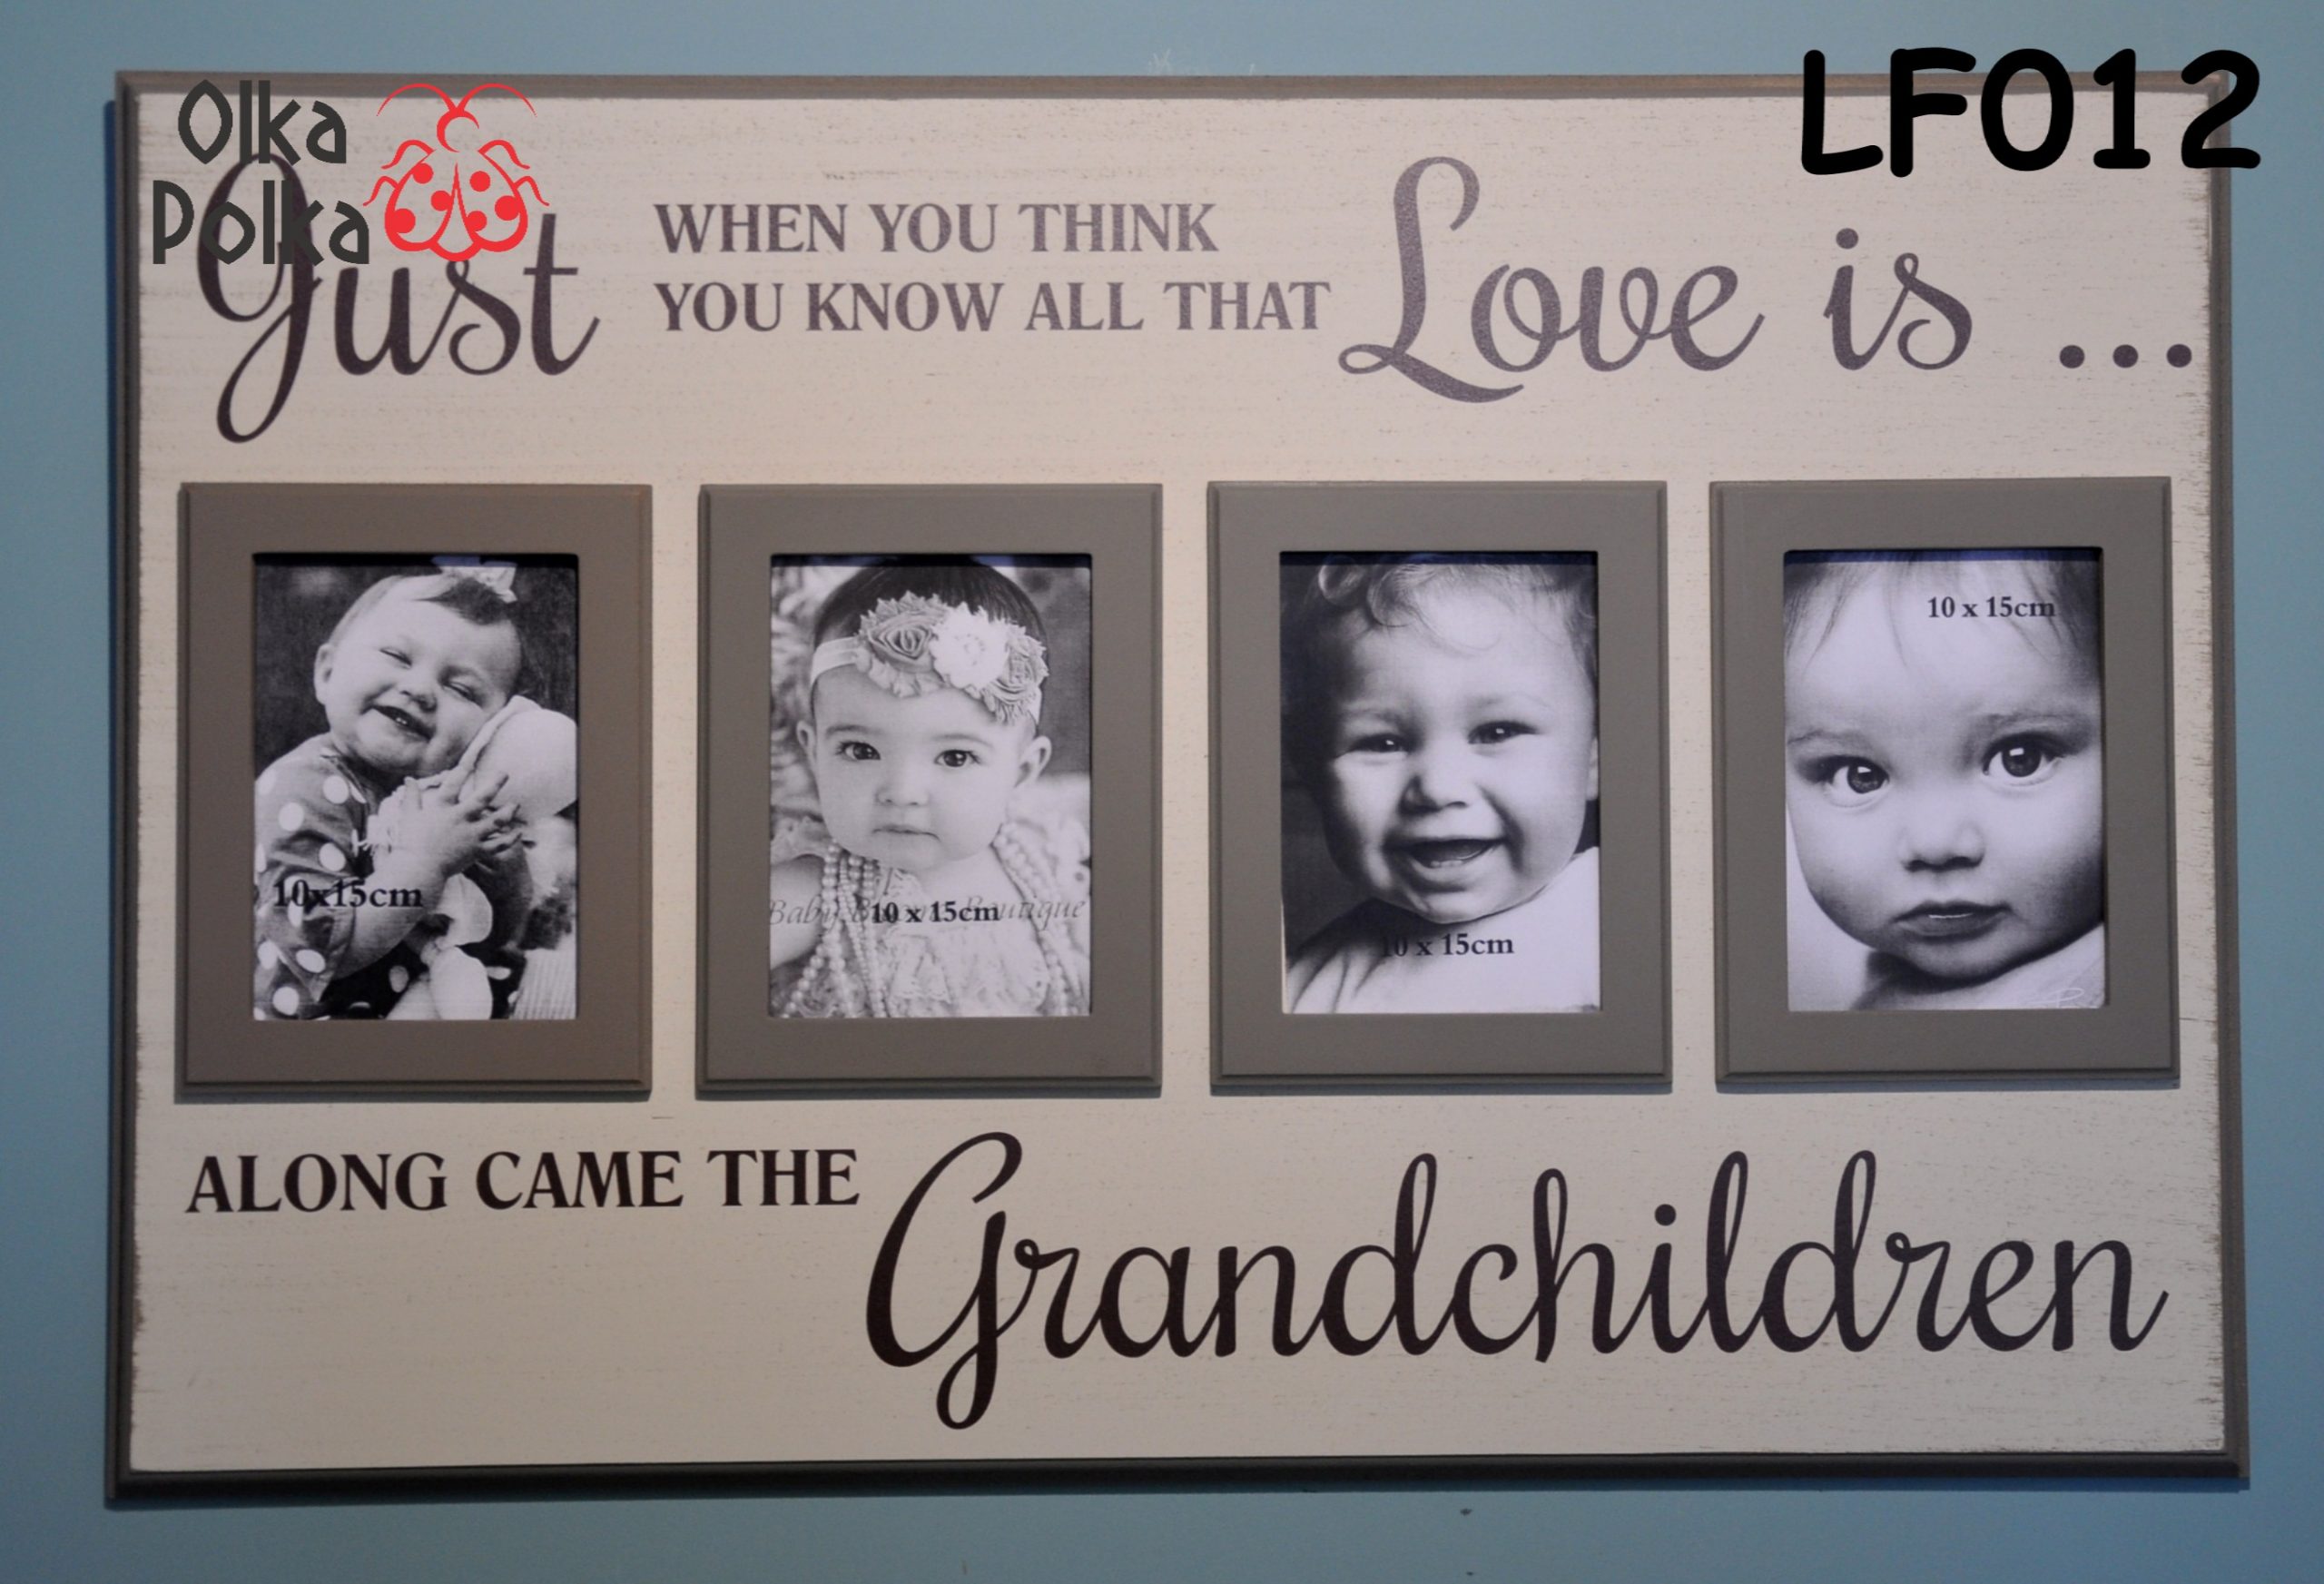 Just when you think you know what love is along came the Grandchildren 4f